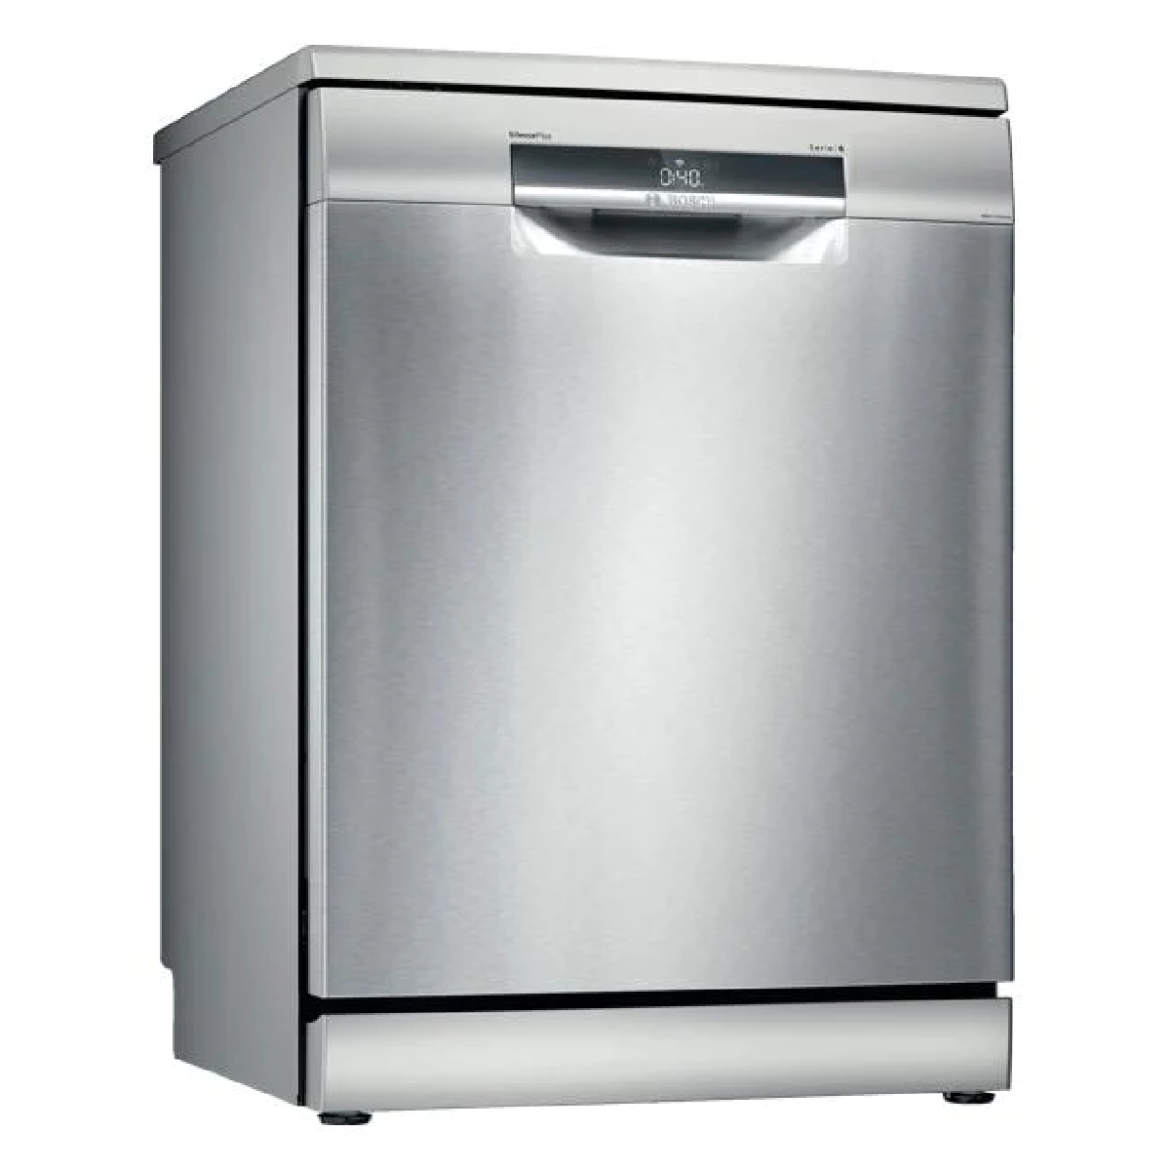 What Makes Bosch Dishwashers the Best for All Homeowners?